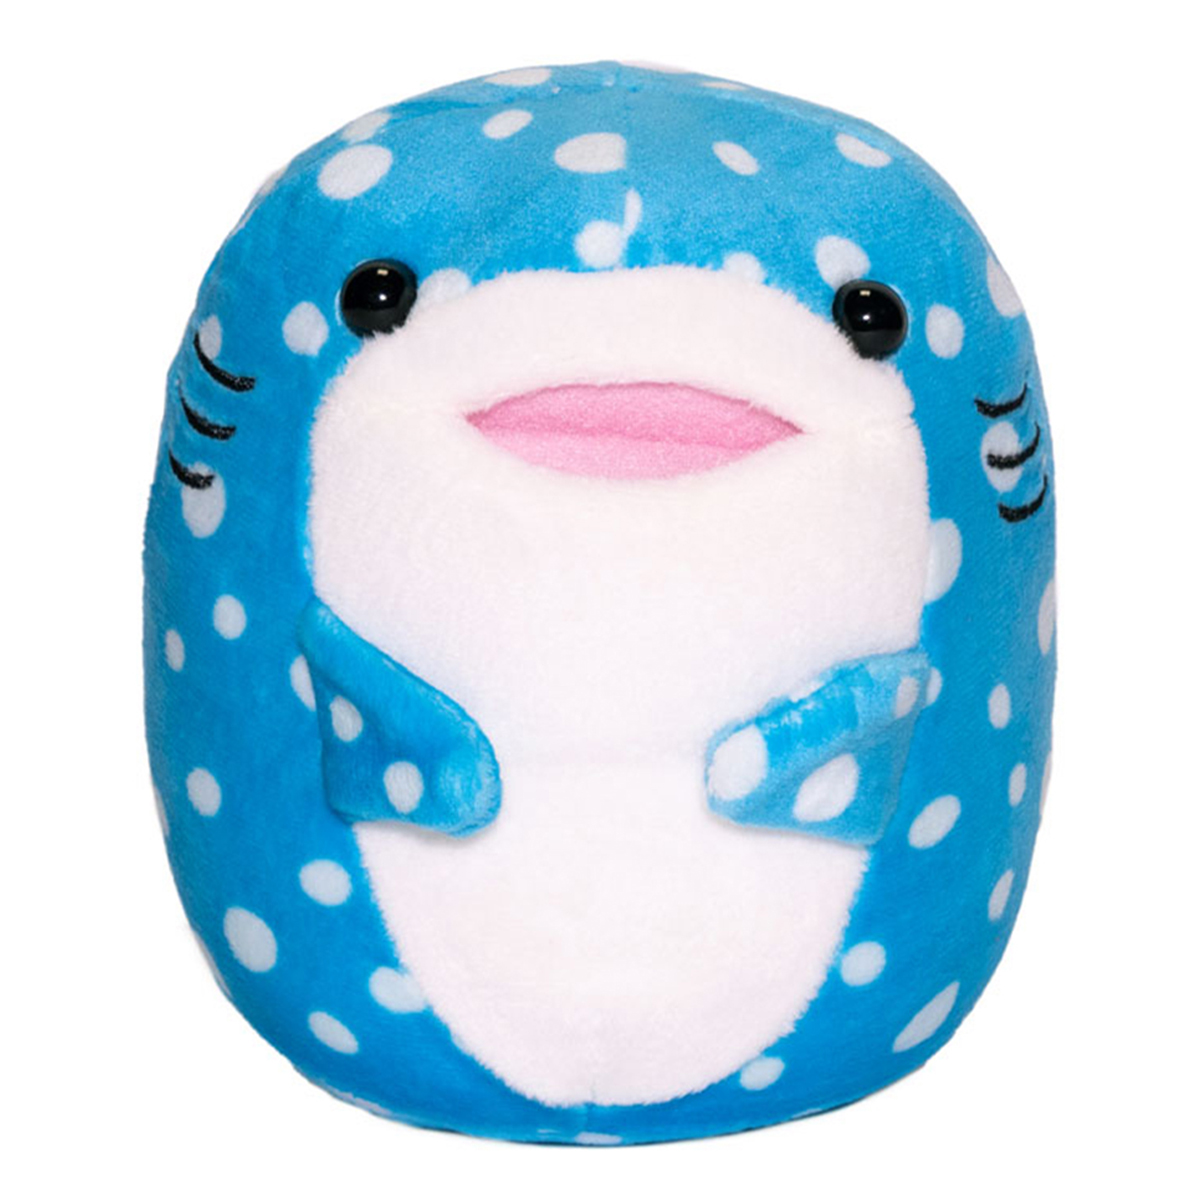 Whale Shark Plush Doll Toy Tachippa!! Standing Super Soft Stuffed Animal Blue White 5 Inches